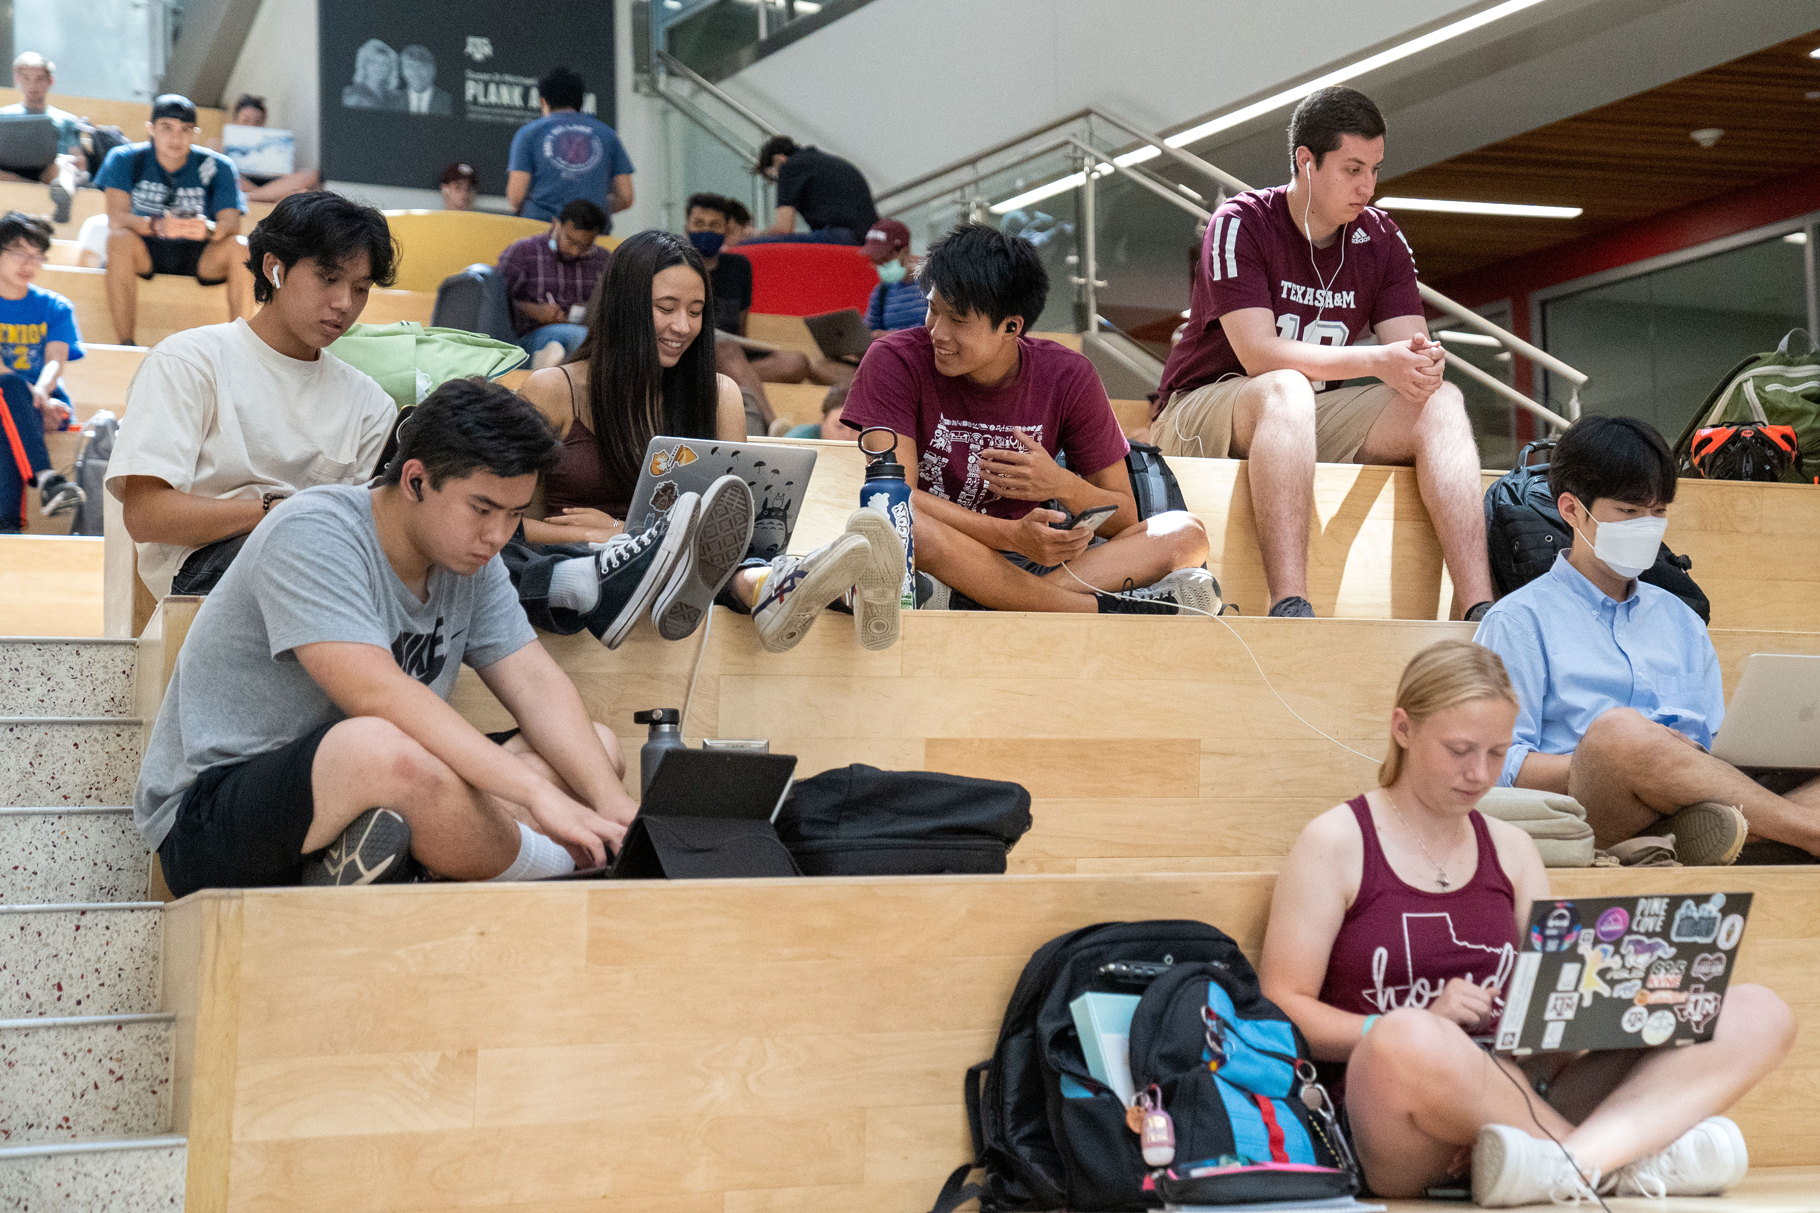 Students work on their computers on the Texas A&M University campus